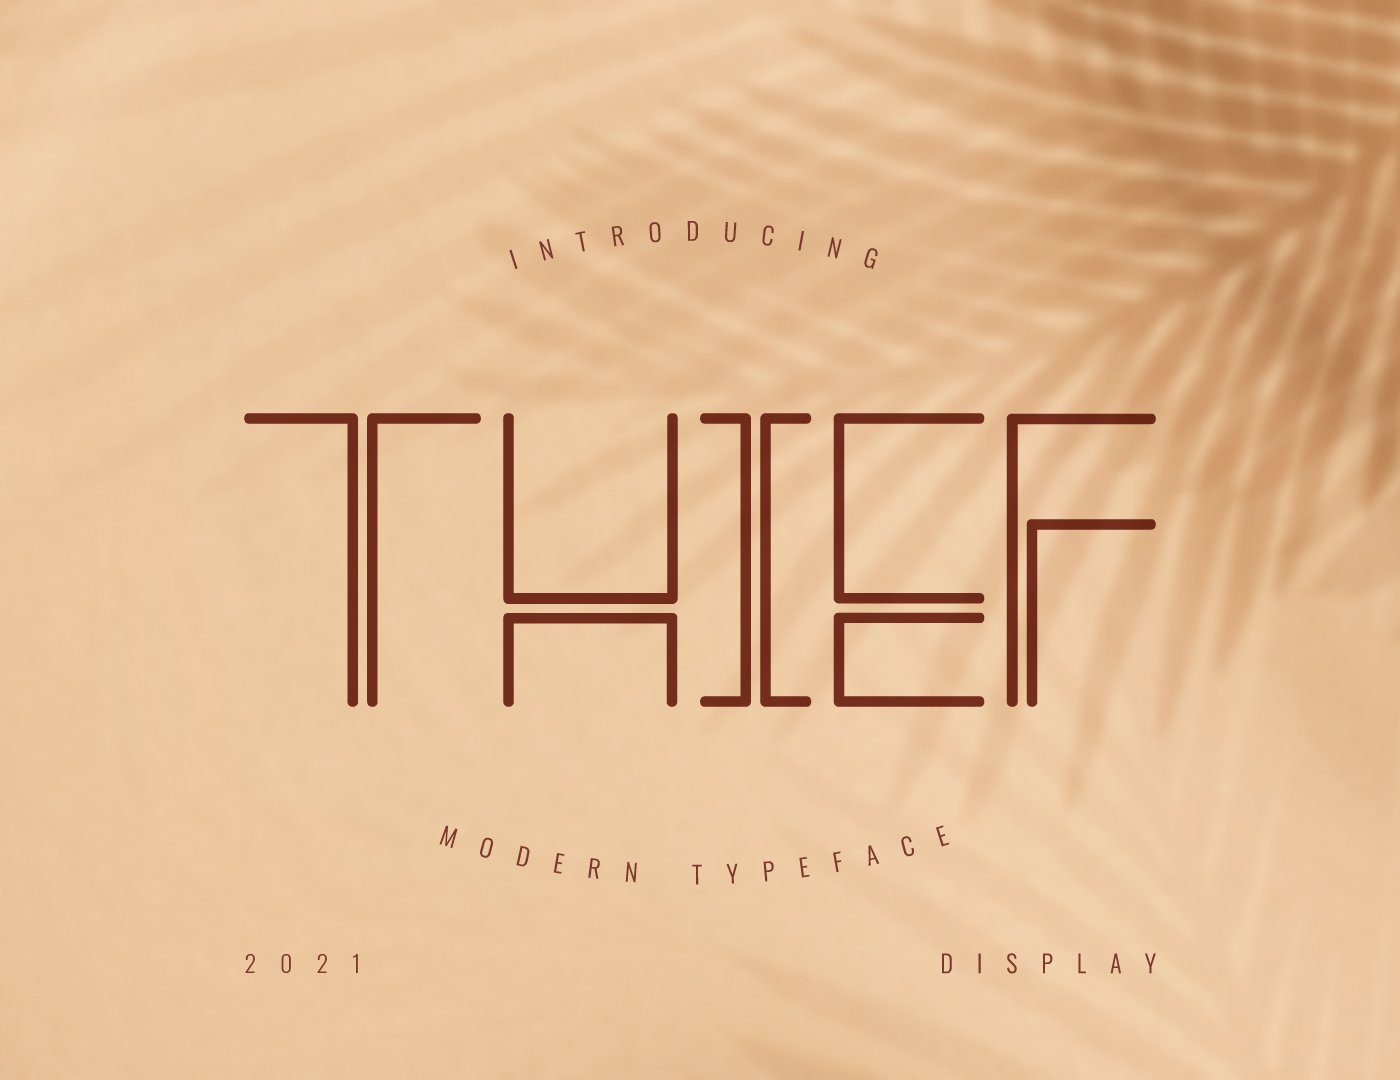 Thief Modern Typeface cover image.